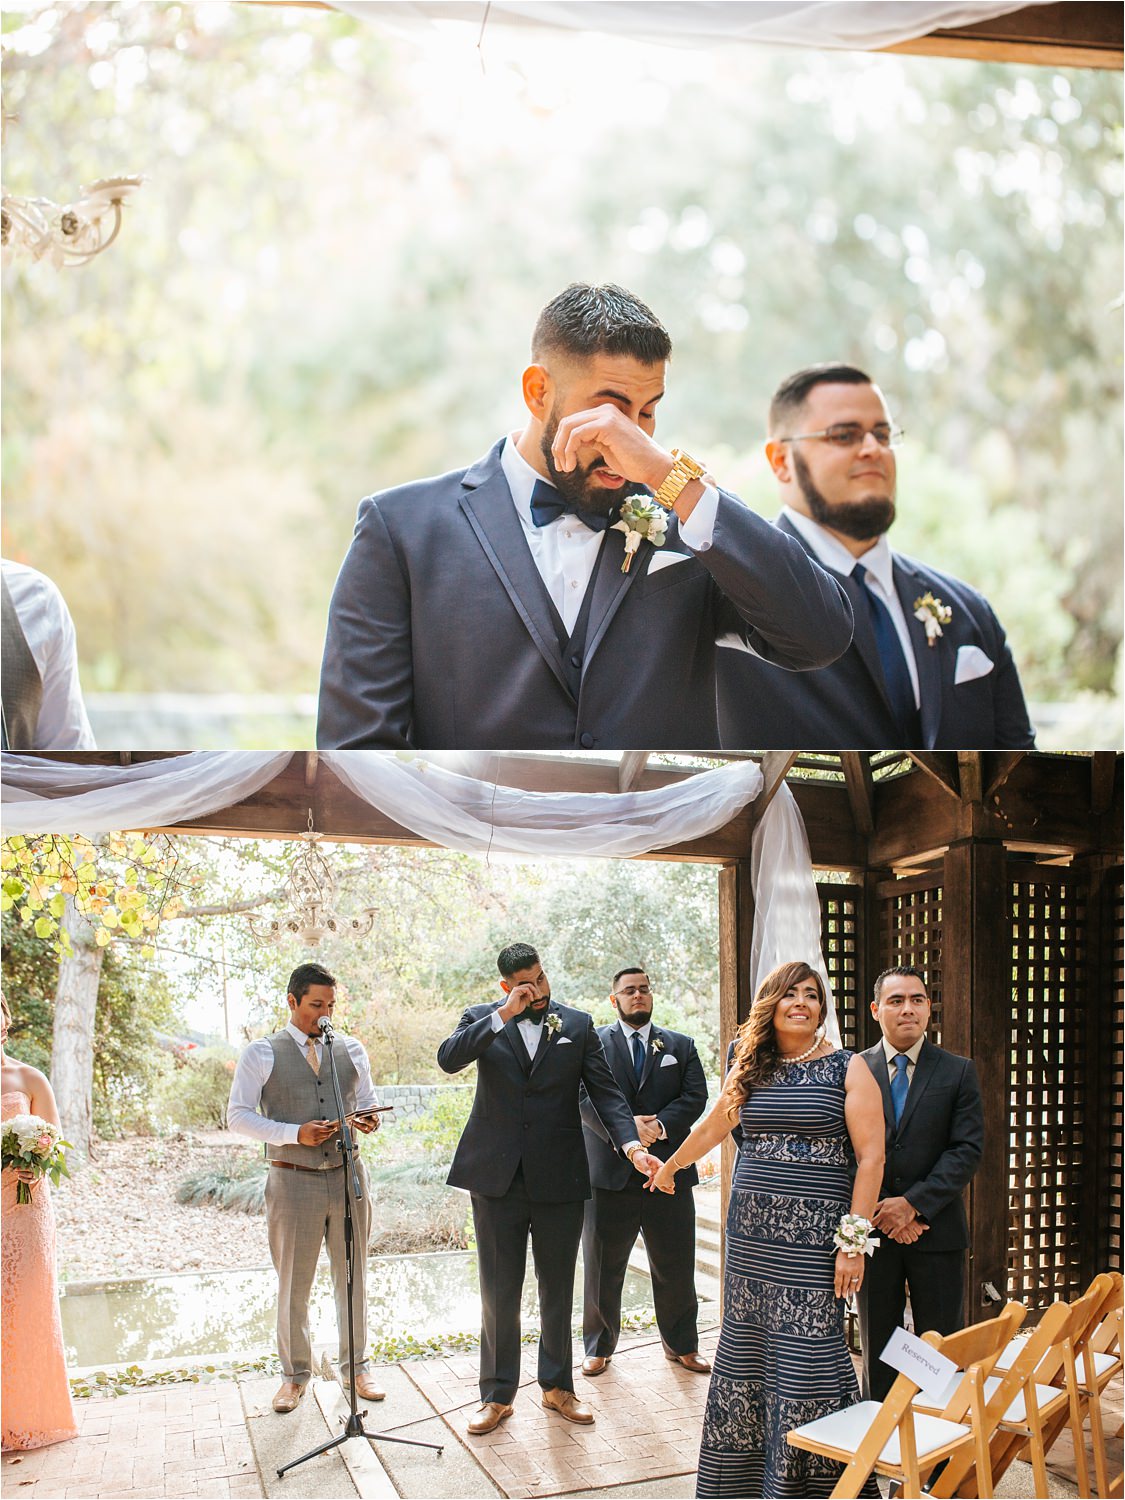 Groom seeing bride walking down the aisle - emotional groom - http://brittneyhannonphotography.com